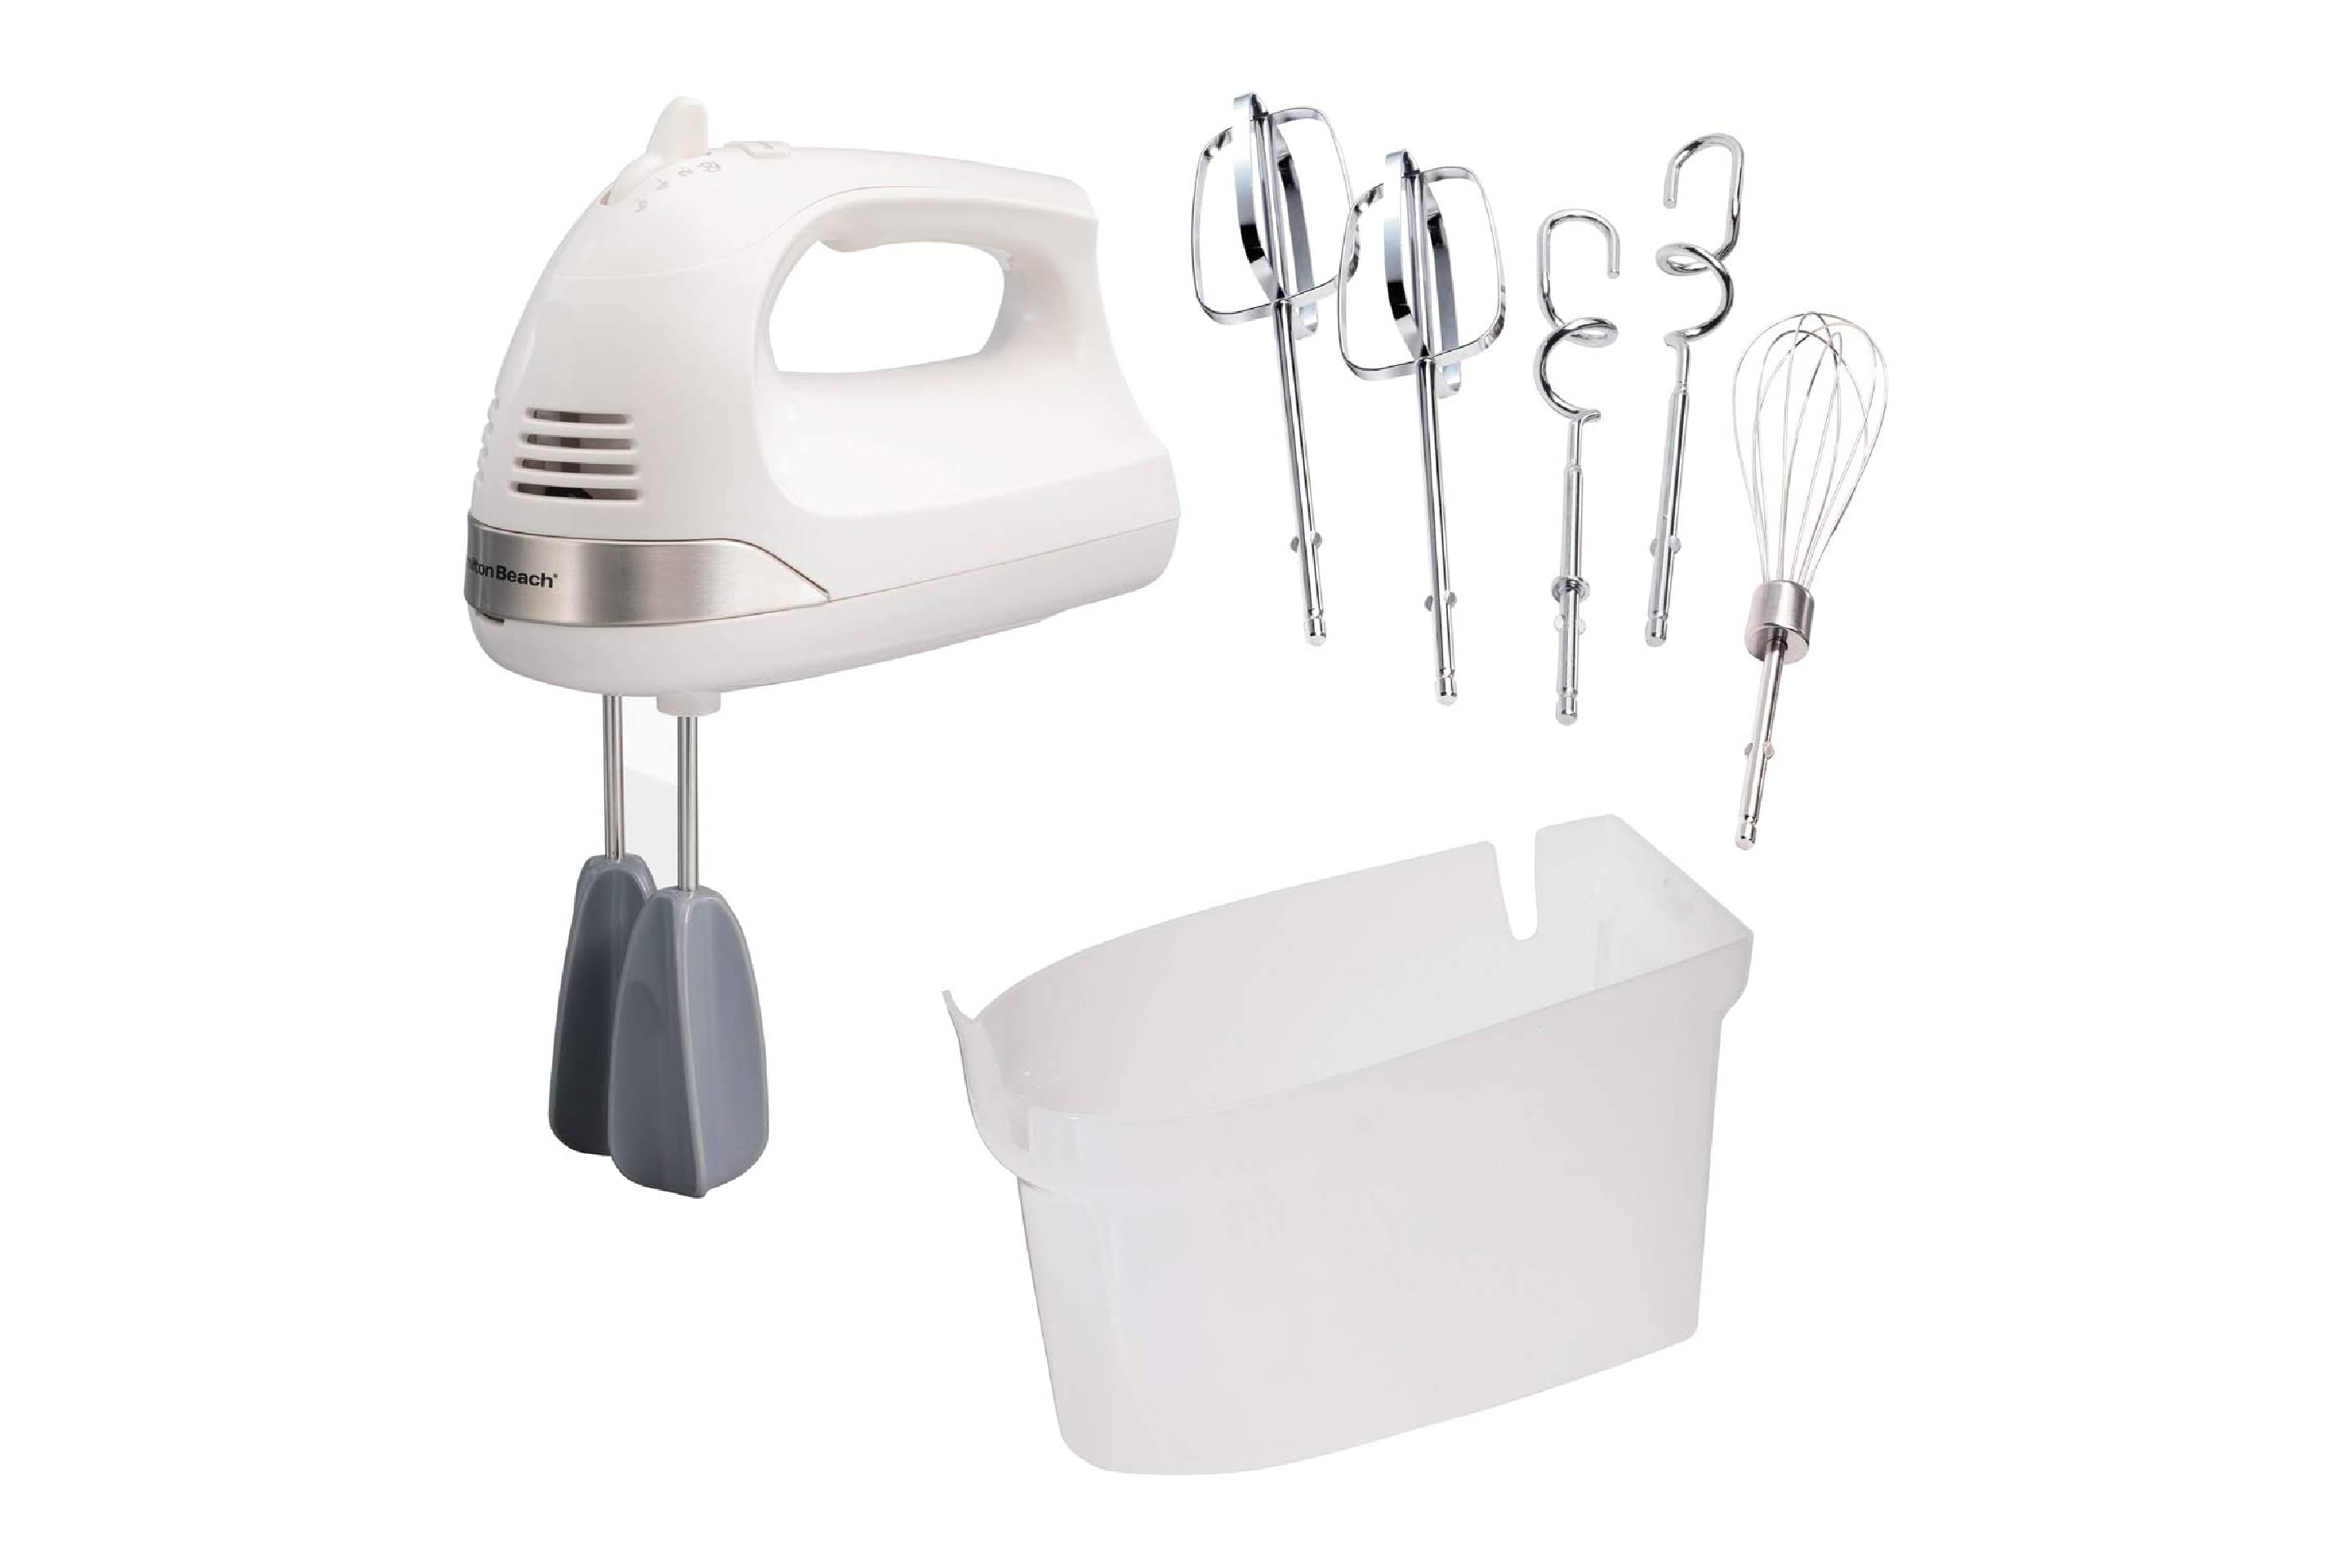 Hamilton Beach 6-Speed Electric Hand Mixer is Suitable for What Type of User 